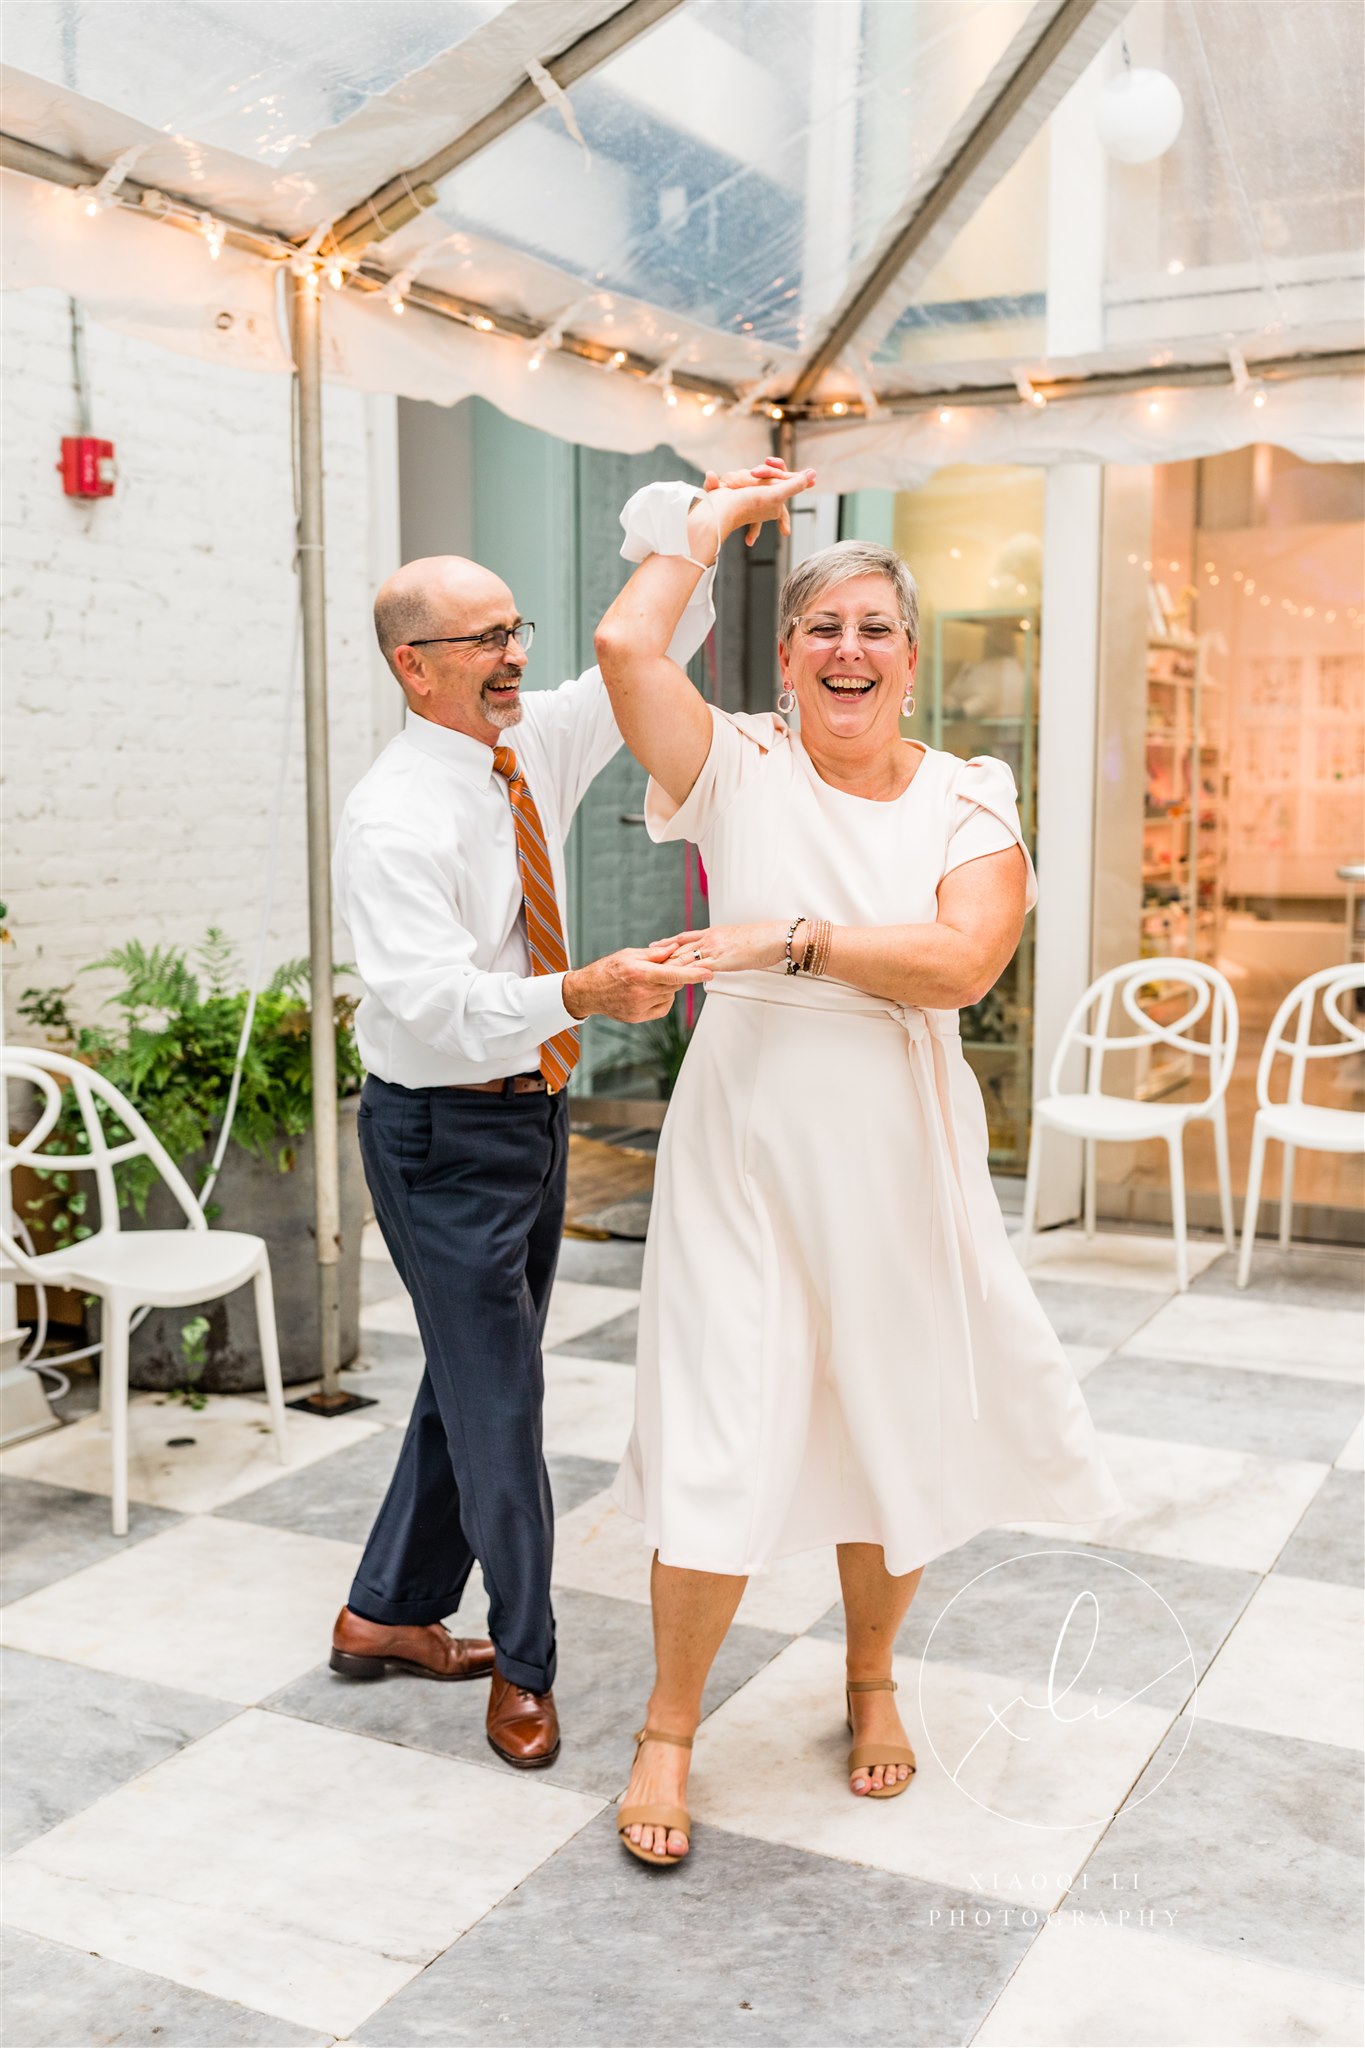 Couple dancing at Quirk Hotel during brunch reception